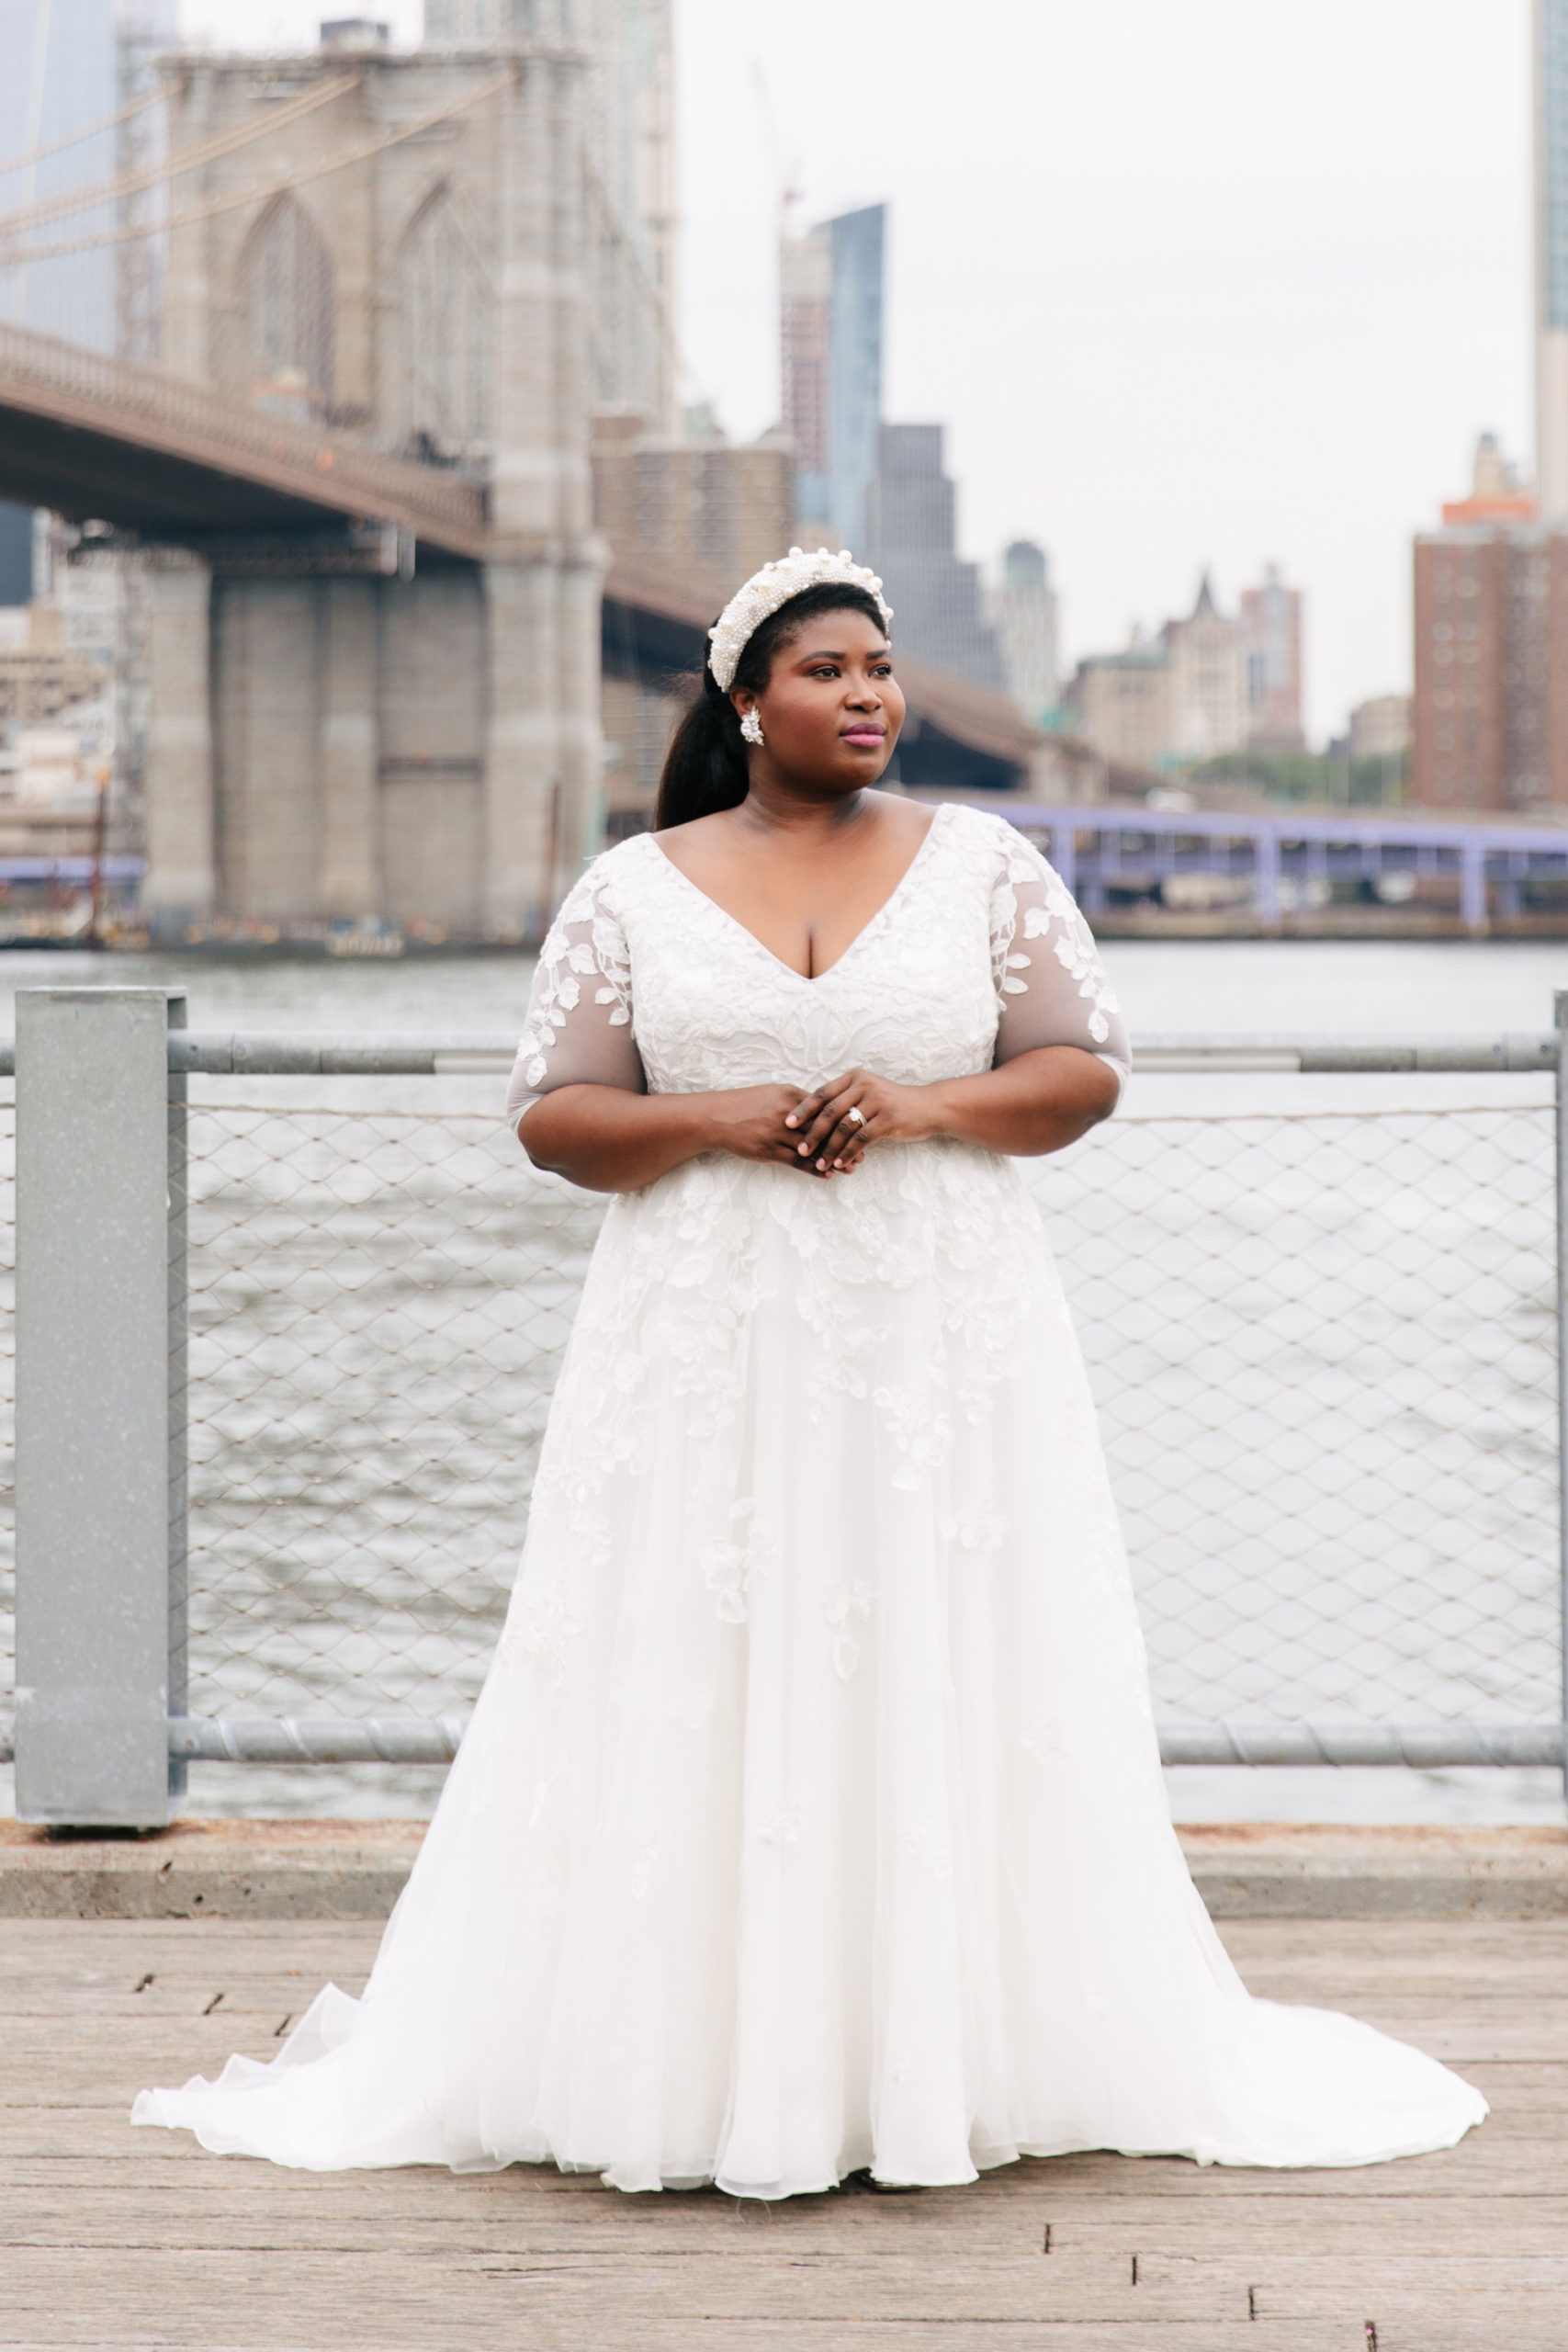 How to get married in Dumbo Brooklyn // Civil Wedding in NYC Project Cupid